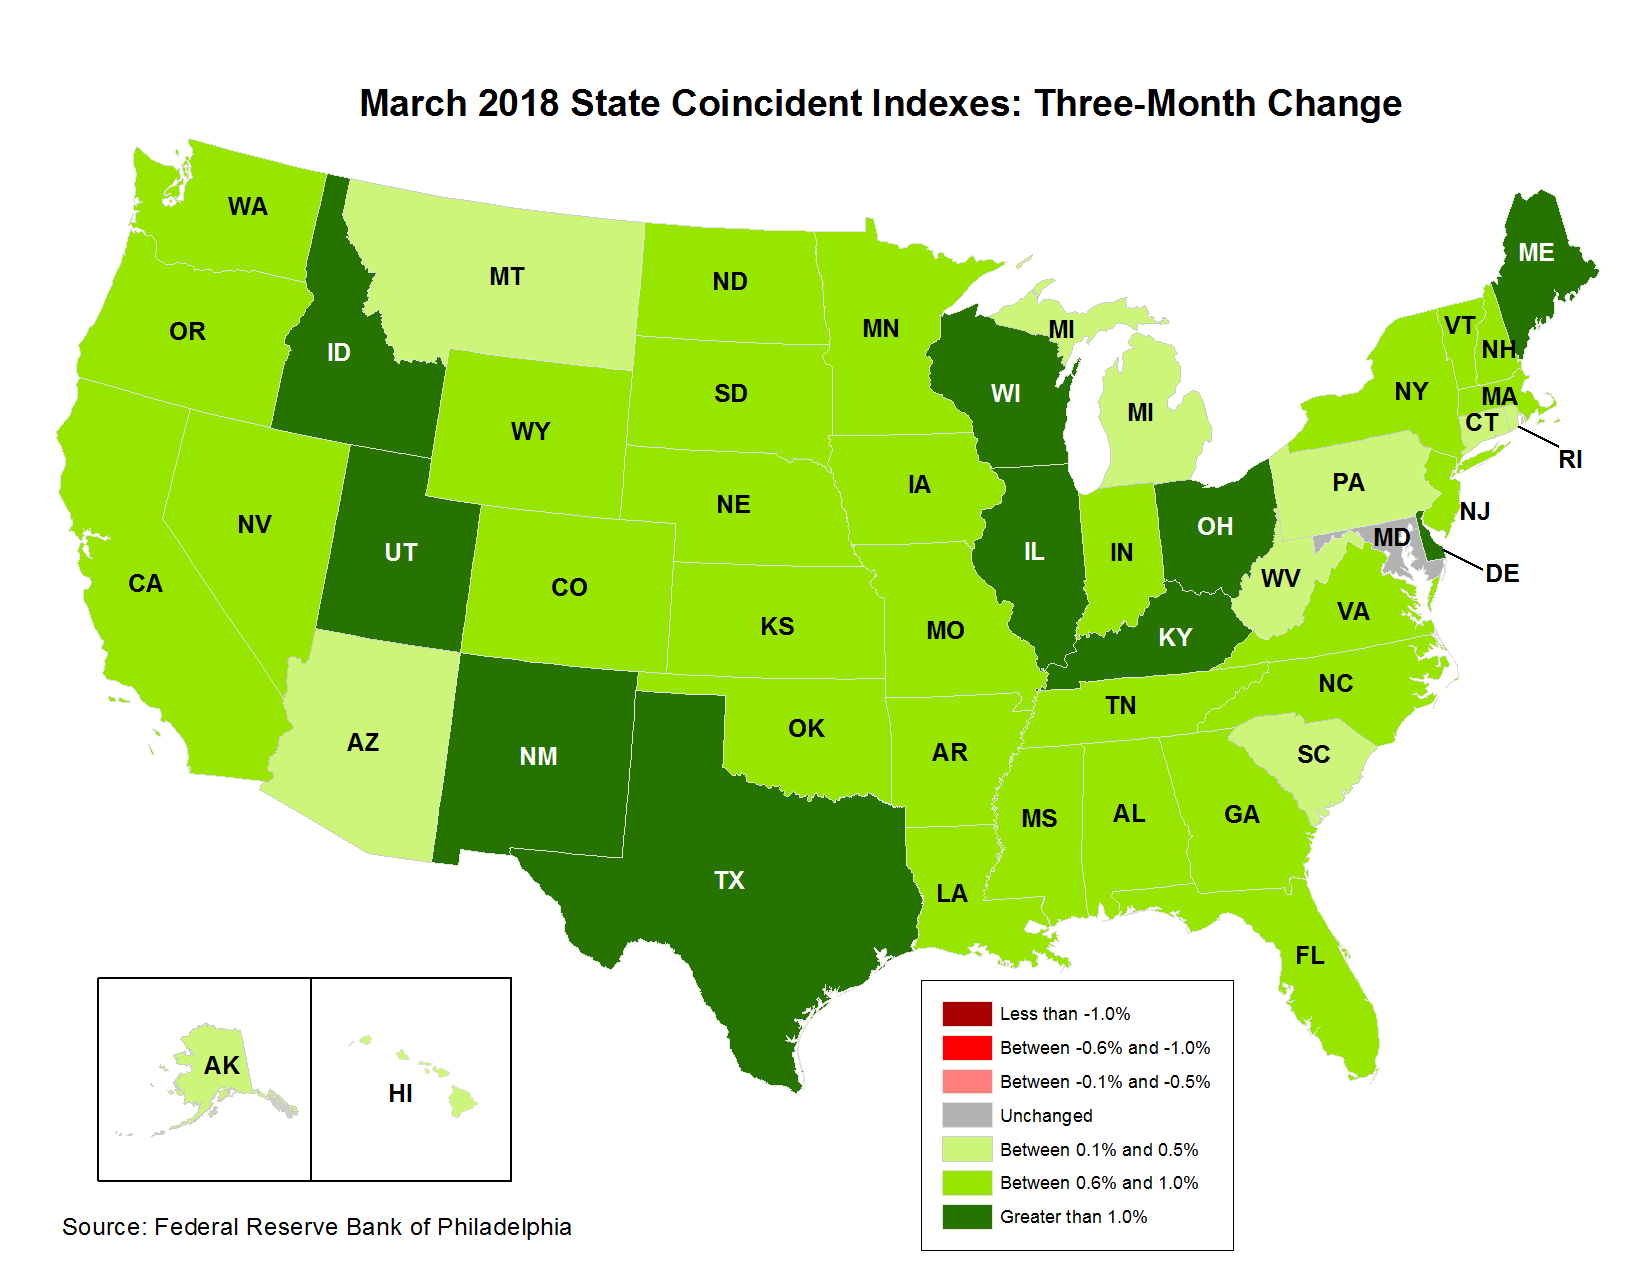 Map of the U.S. showing the State Coincident Indexes Three-Month Change in March 2018